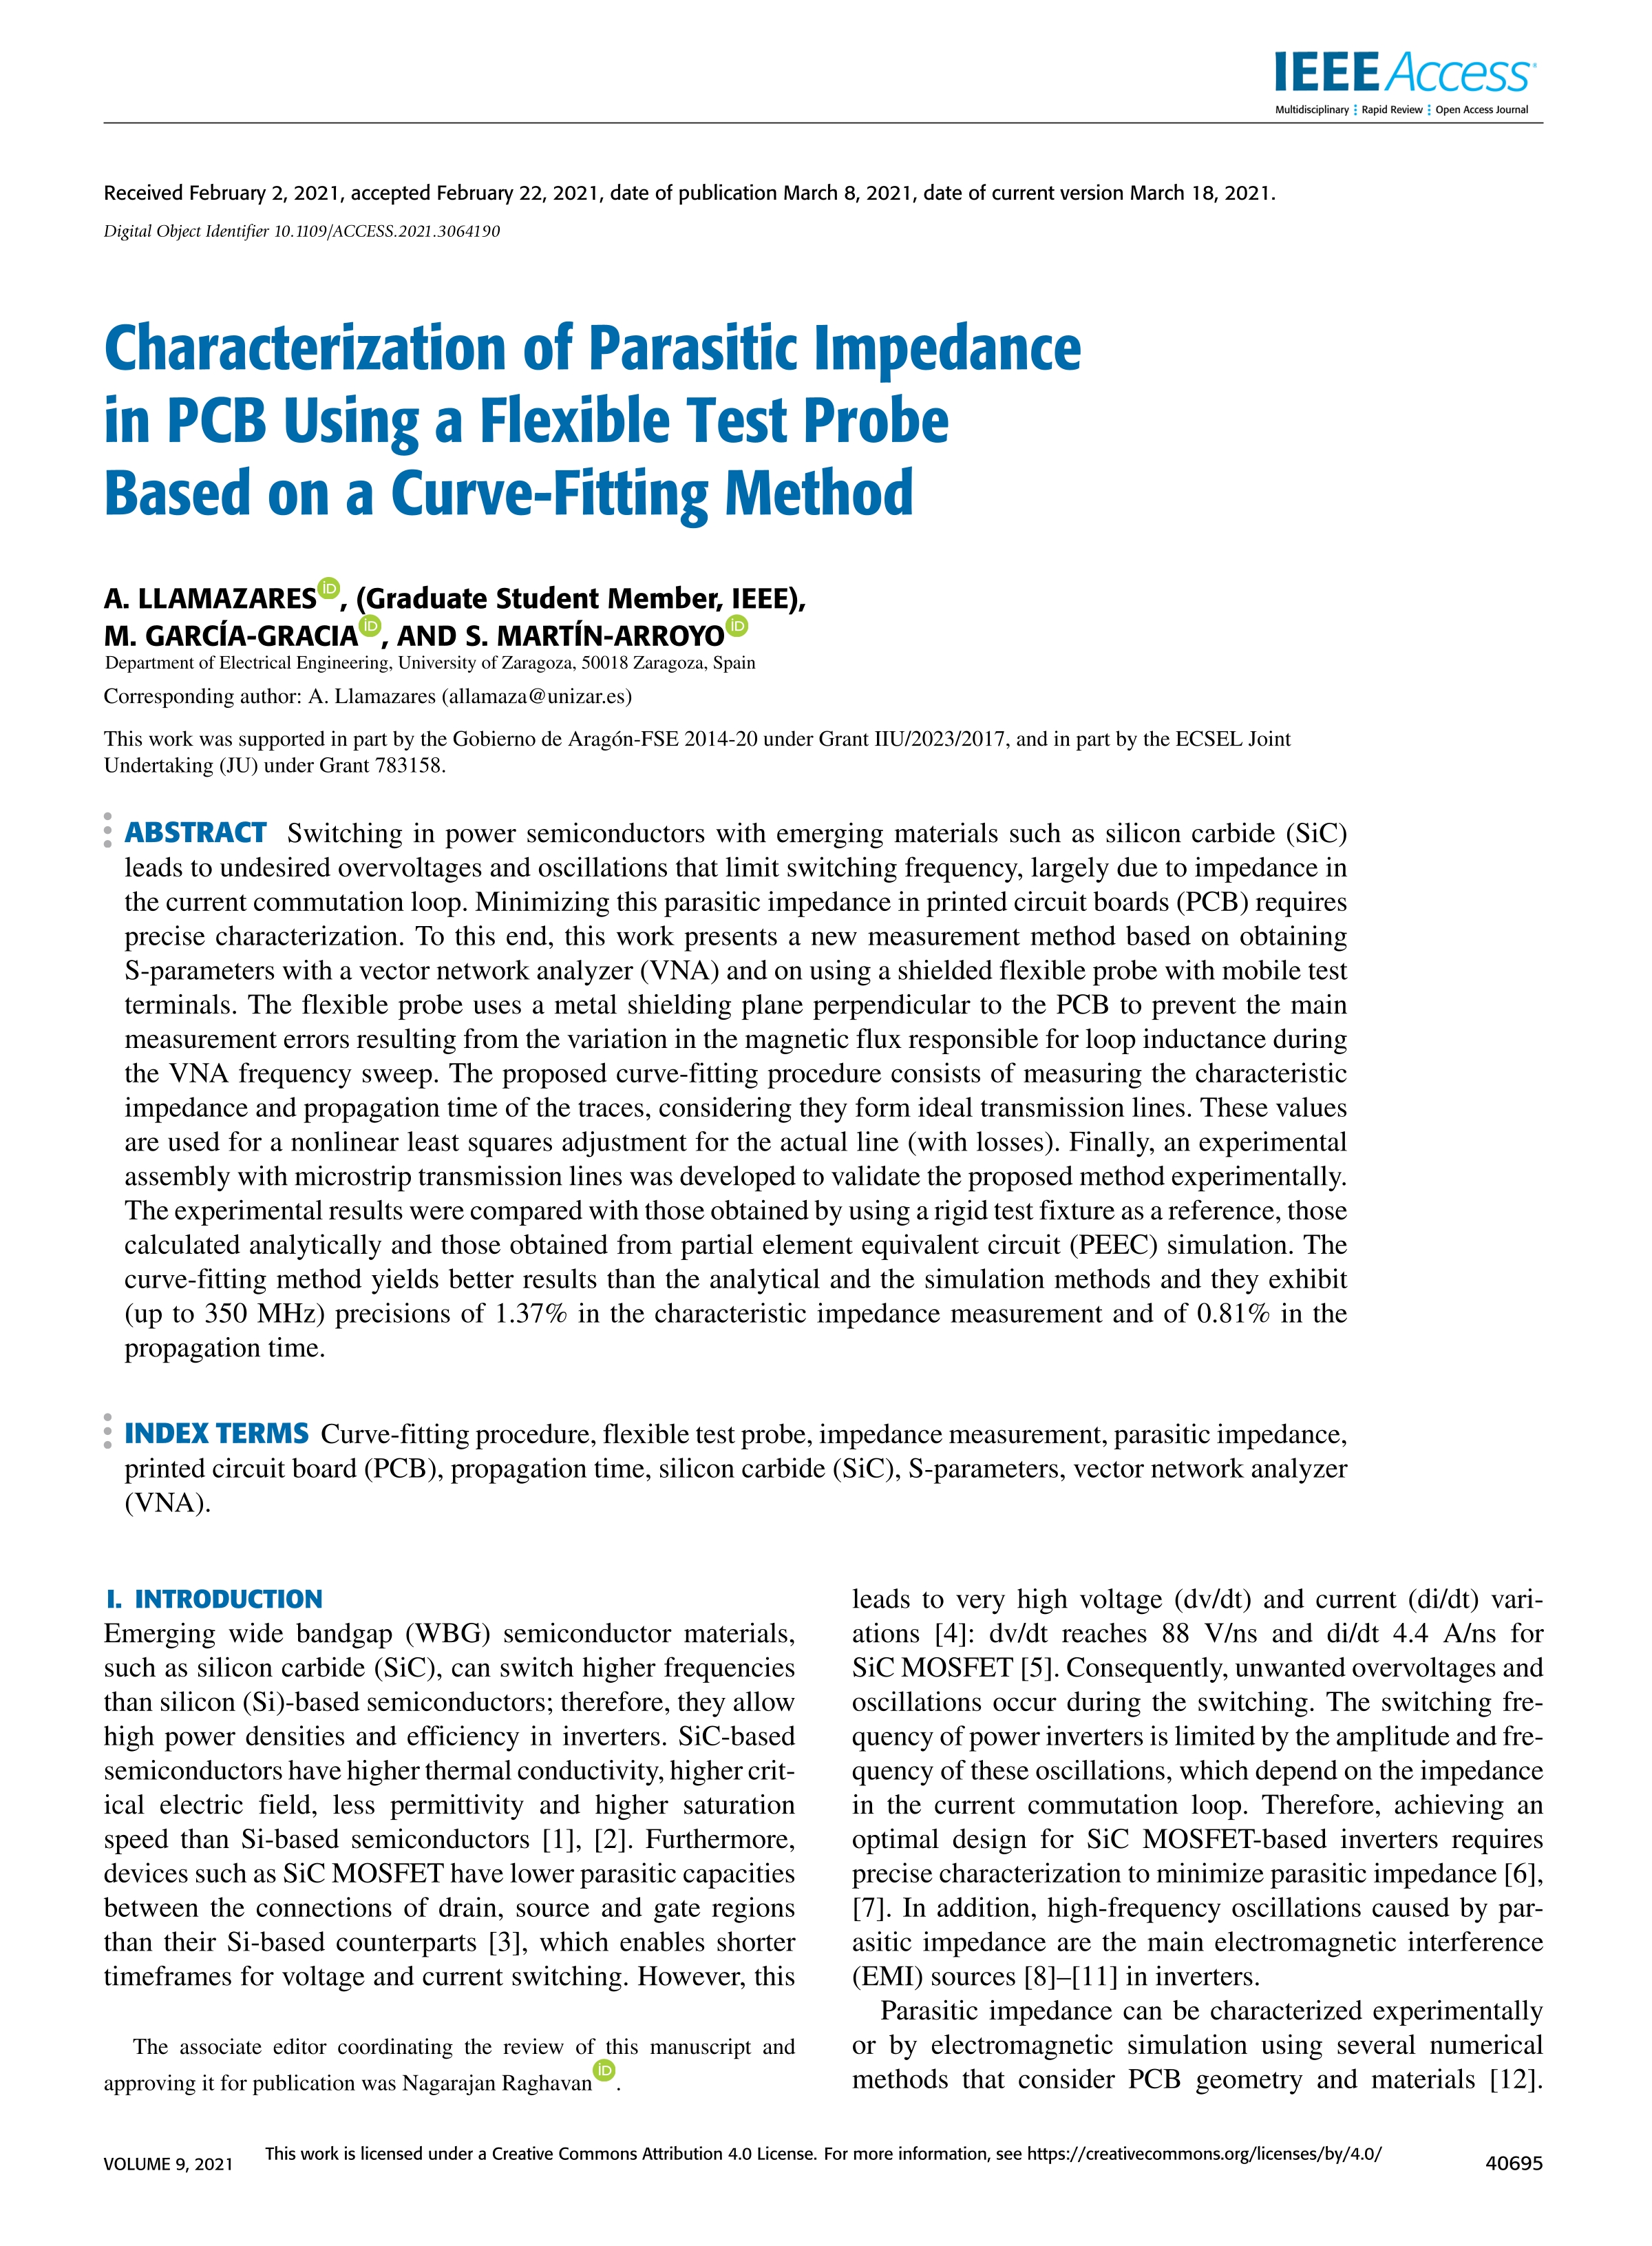 Characterization of parasitic impedance in PCB using a flexible test probe based on a curve-fitting method